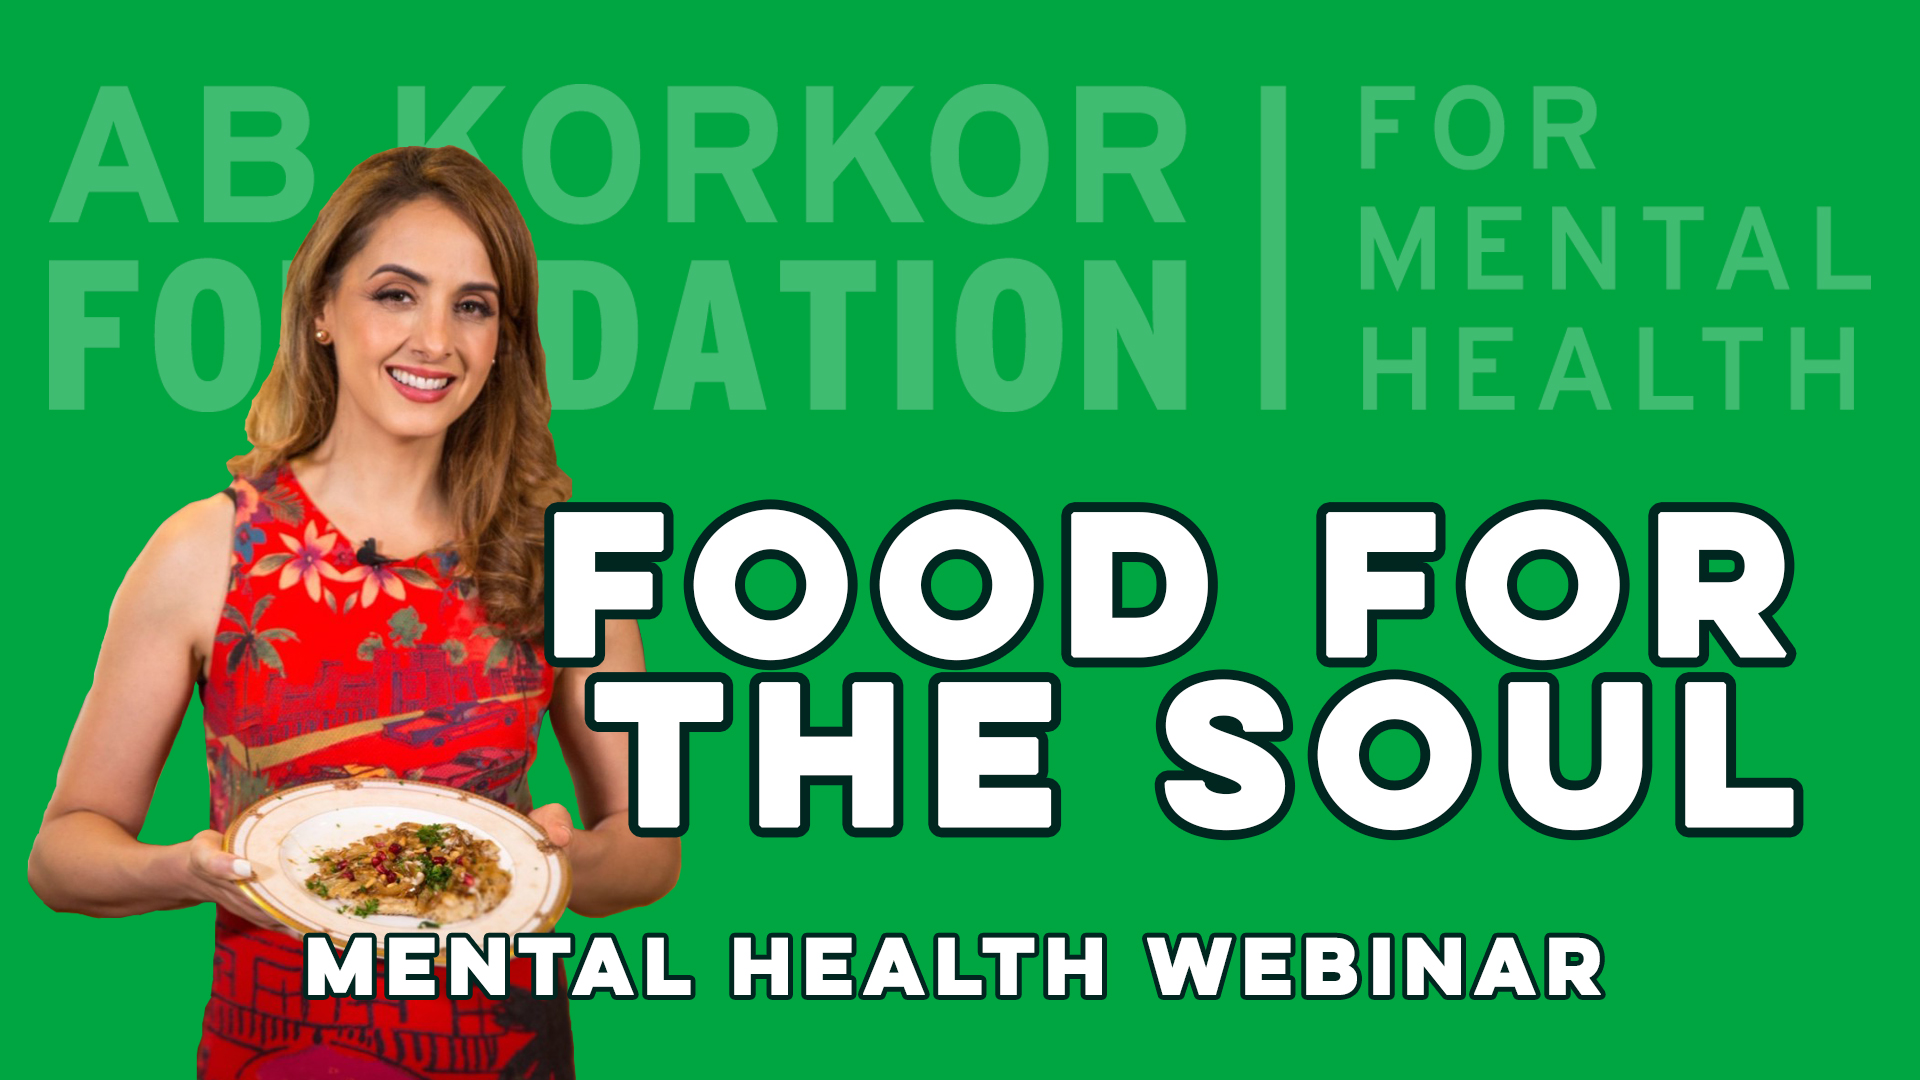 Food for the Soul - Blanche Shaheen - Mental Health Webinar